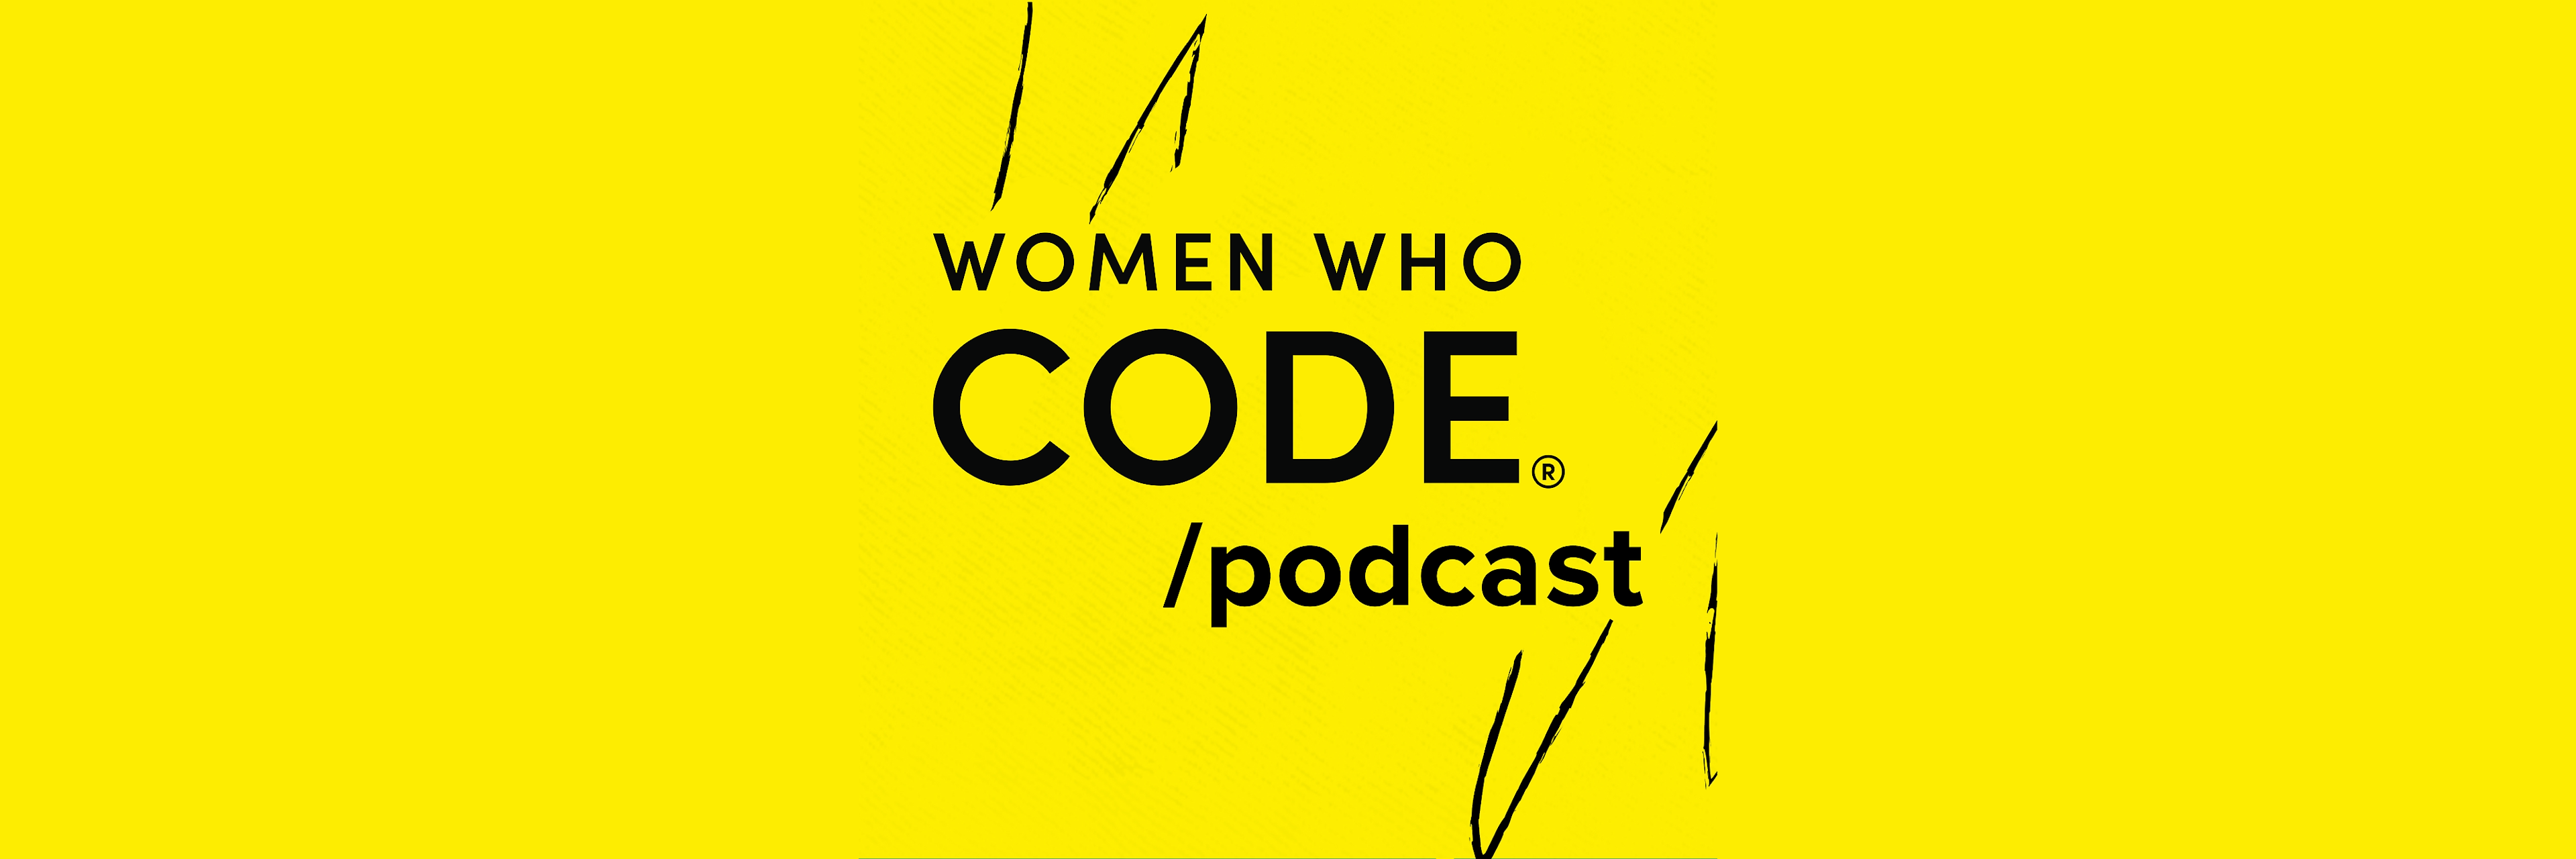 WWCode Conversations #63: How to Transition Into a Tech Career: Panel Discussion